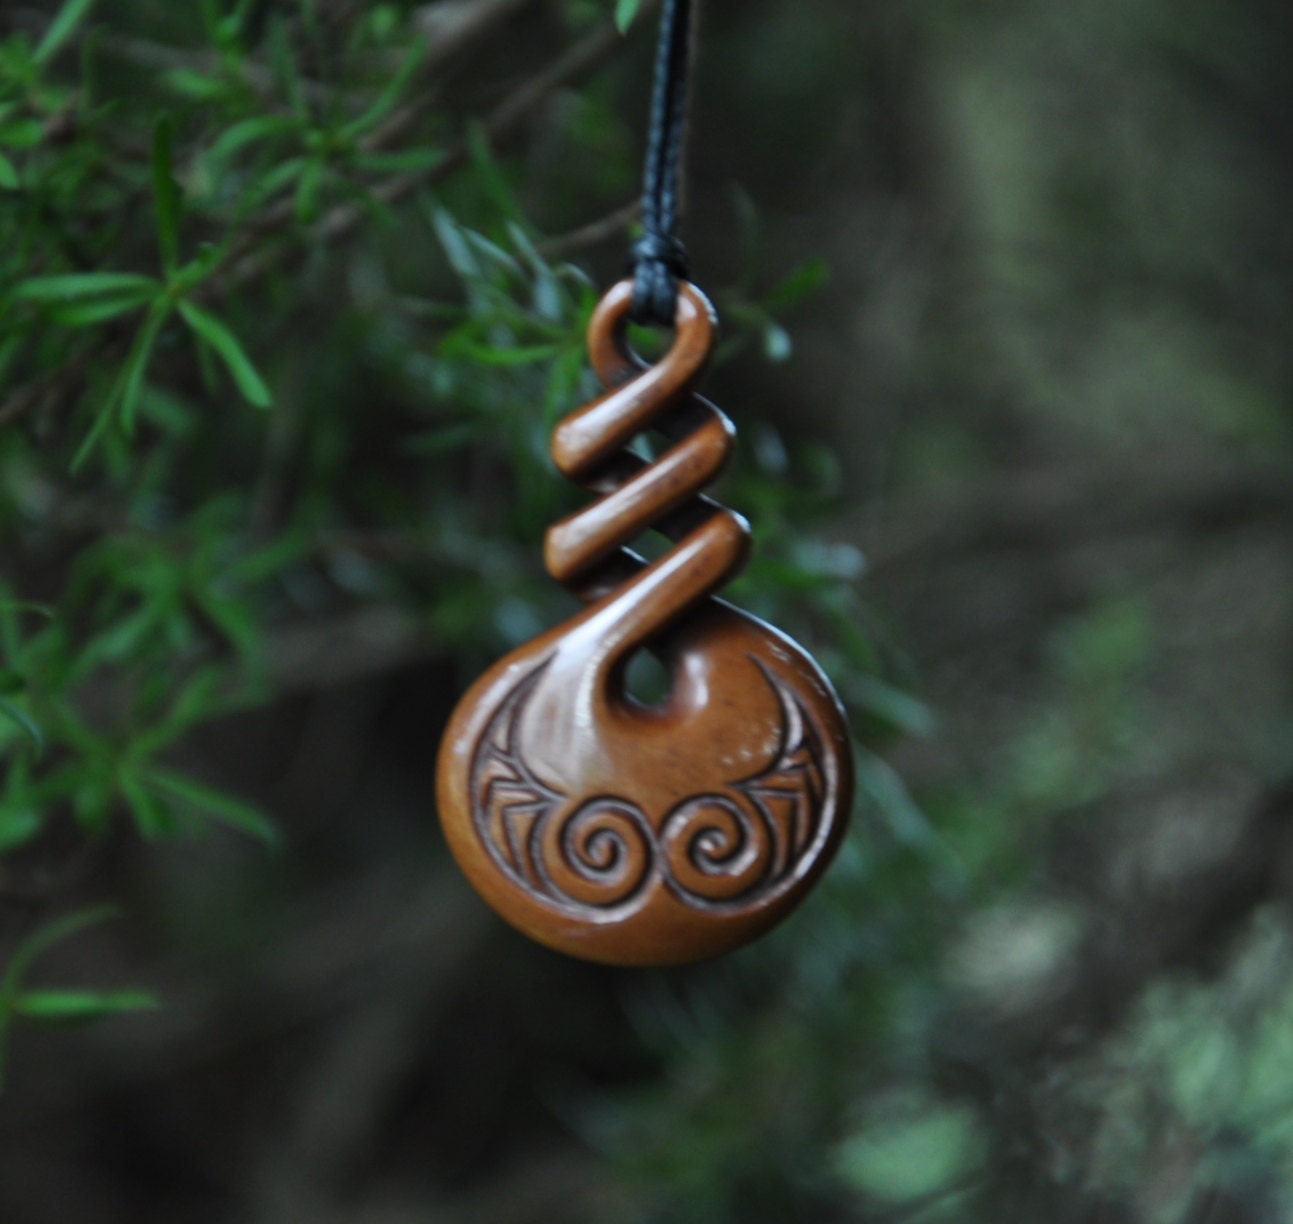 Eternal bonding symbol. Handcarved & naturally stained - JackieTump